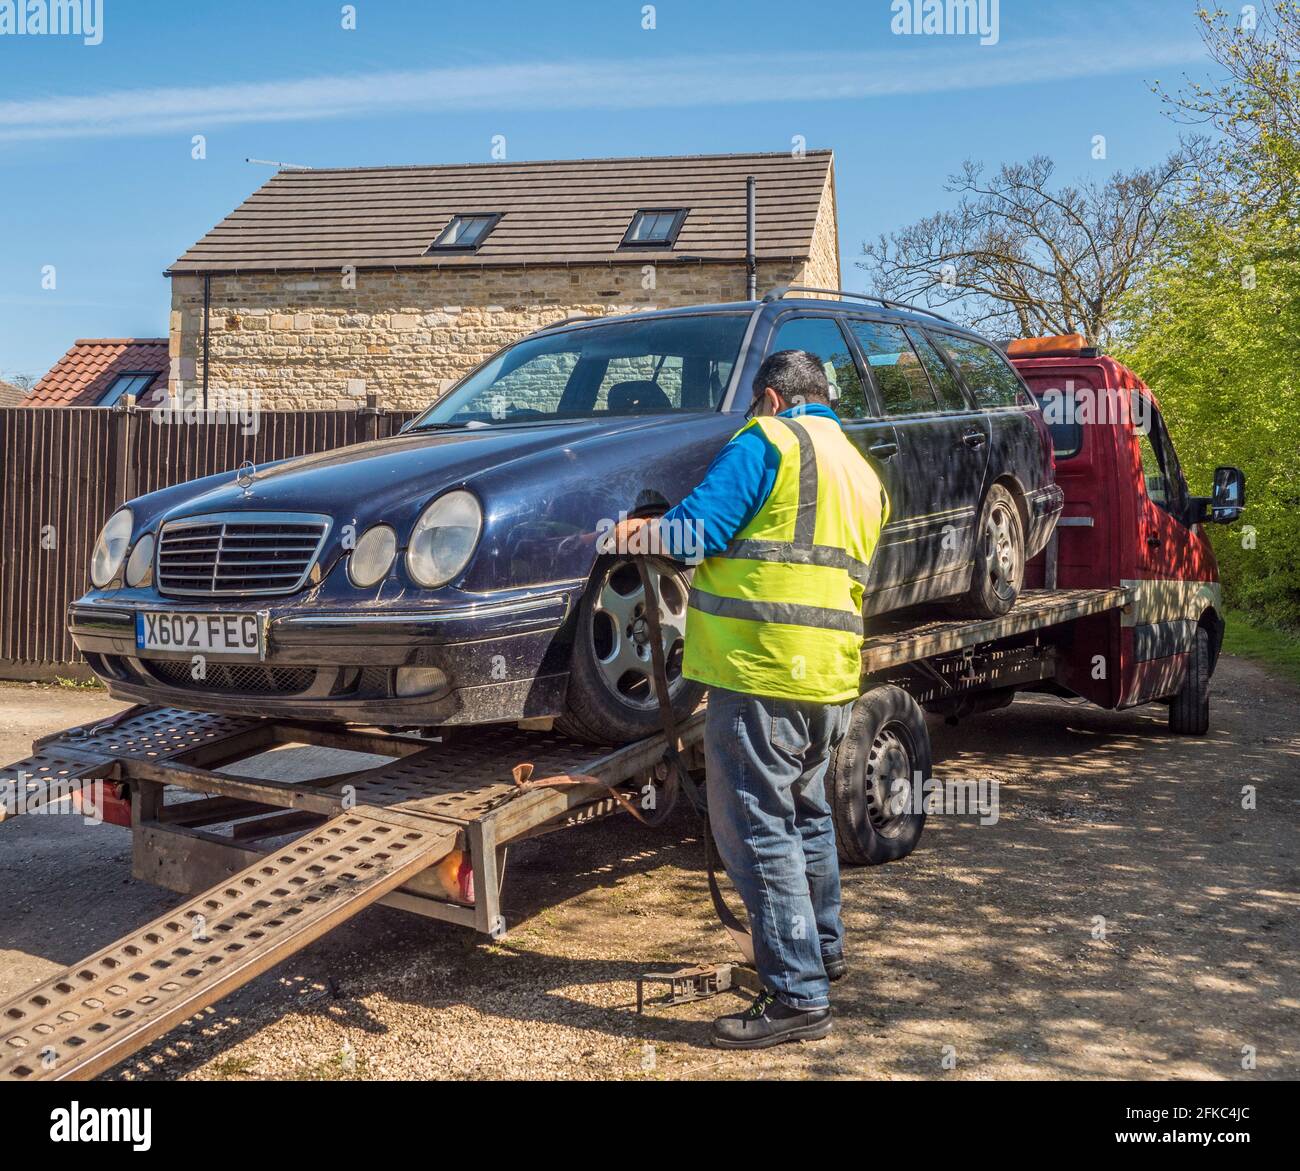 An old Mercedes estate car on a flatbed truck / recovery vehicle, almost ready to be taken away, with the driver tightening a wheel securing strap. Stock Photo